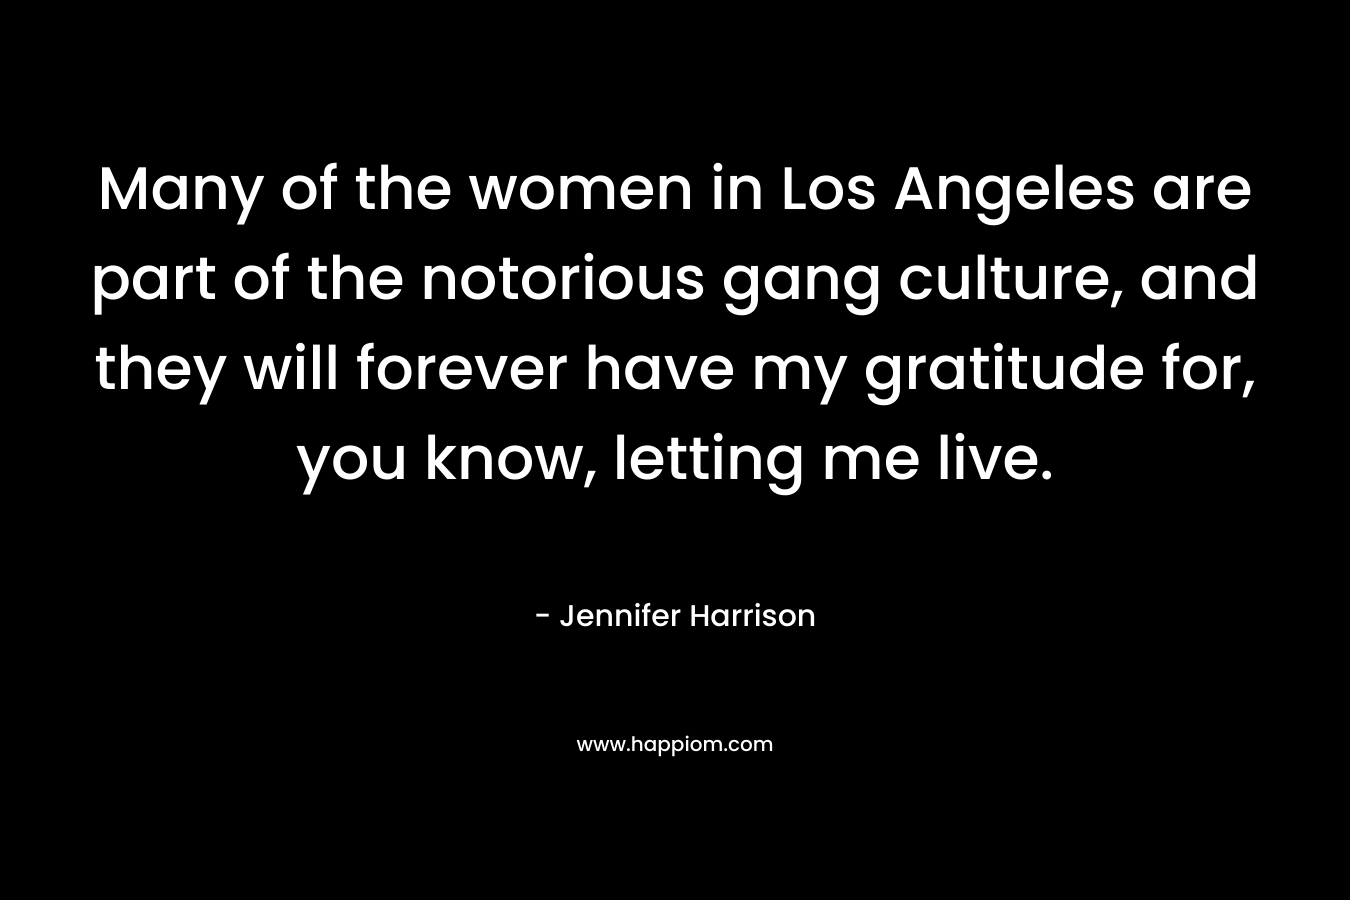 Many of the women in Los Angeles are part of the notorious gang culture, and they will forever have my gratitude for, you know, letting me live. – Jennifer Harrison